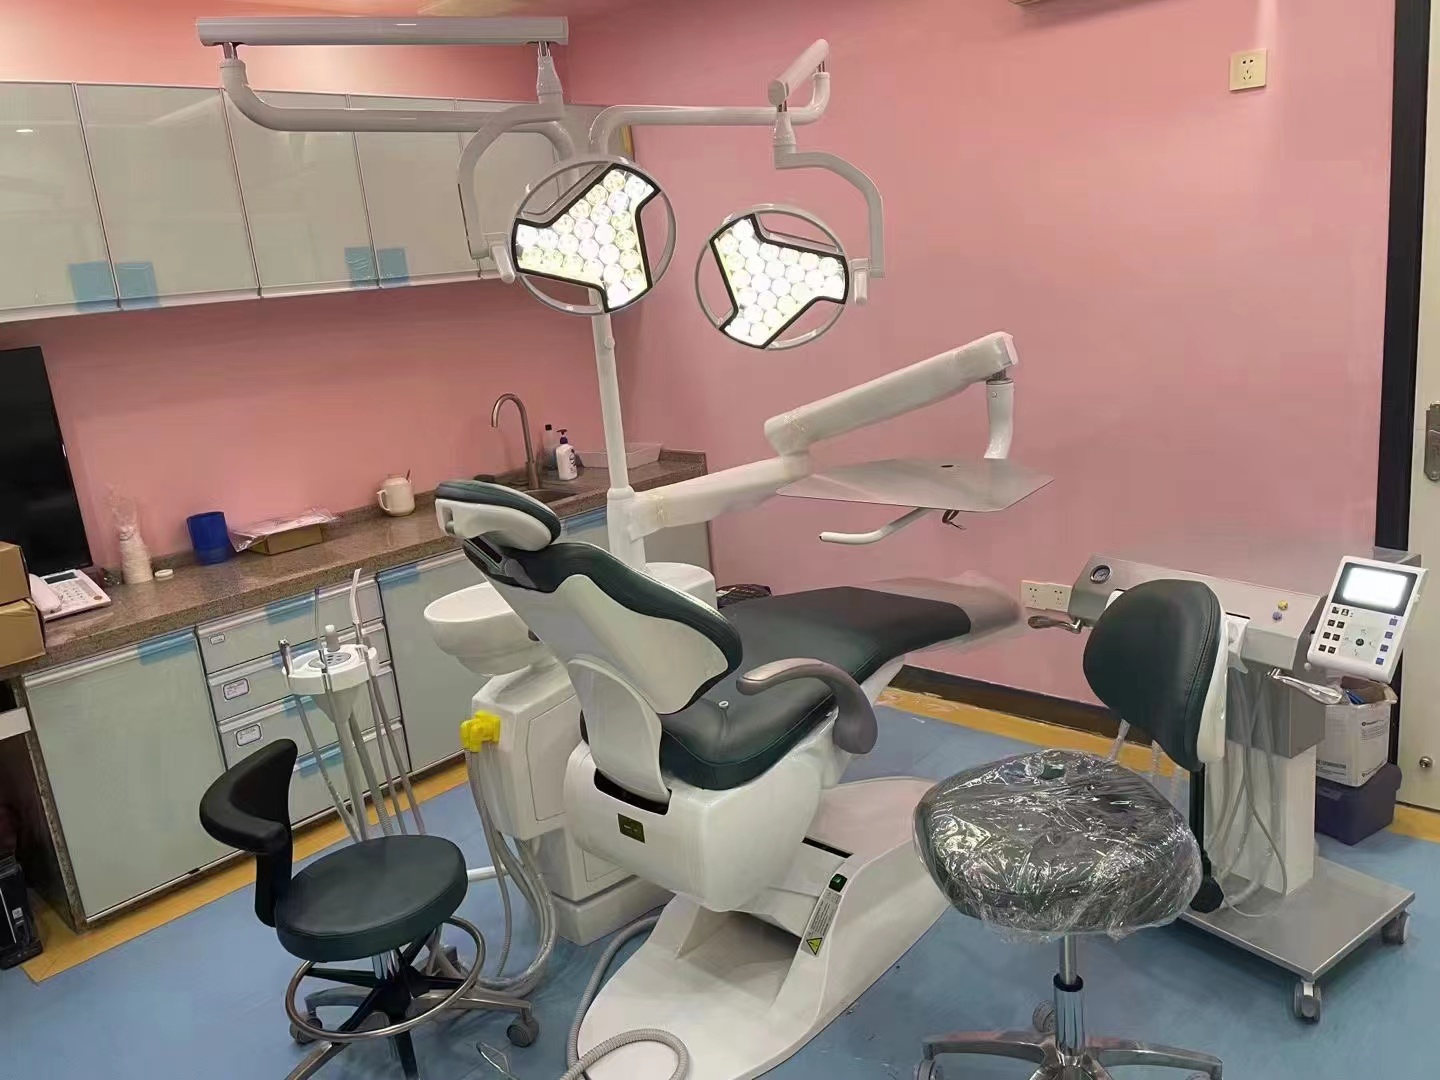 What we should pay attention to and what problems will be encountered when you are decorating dental chair in the dental clinic